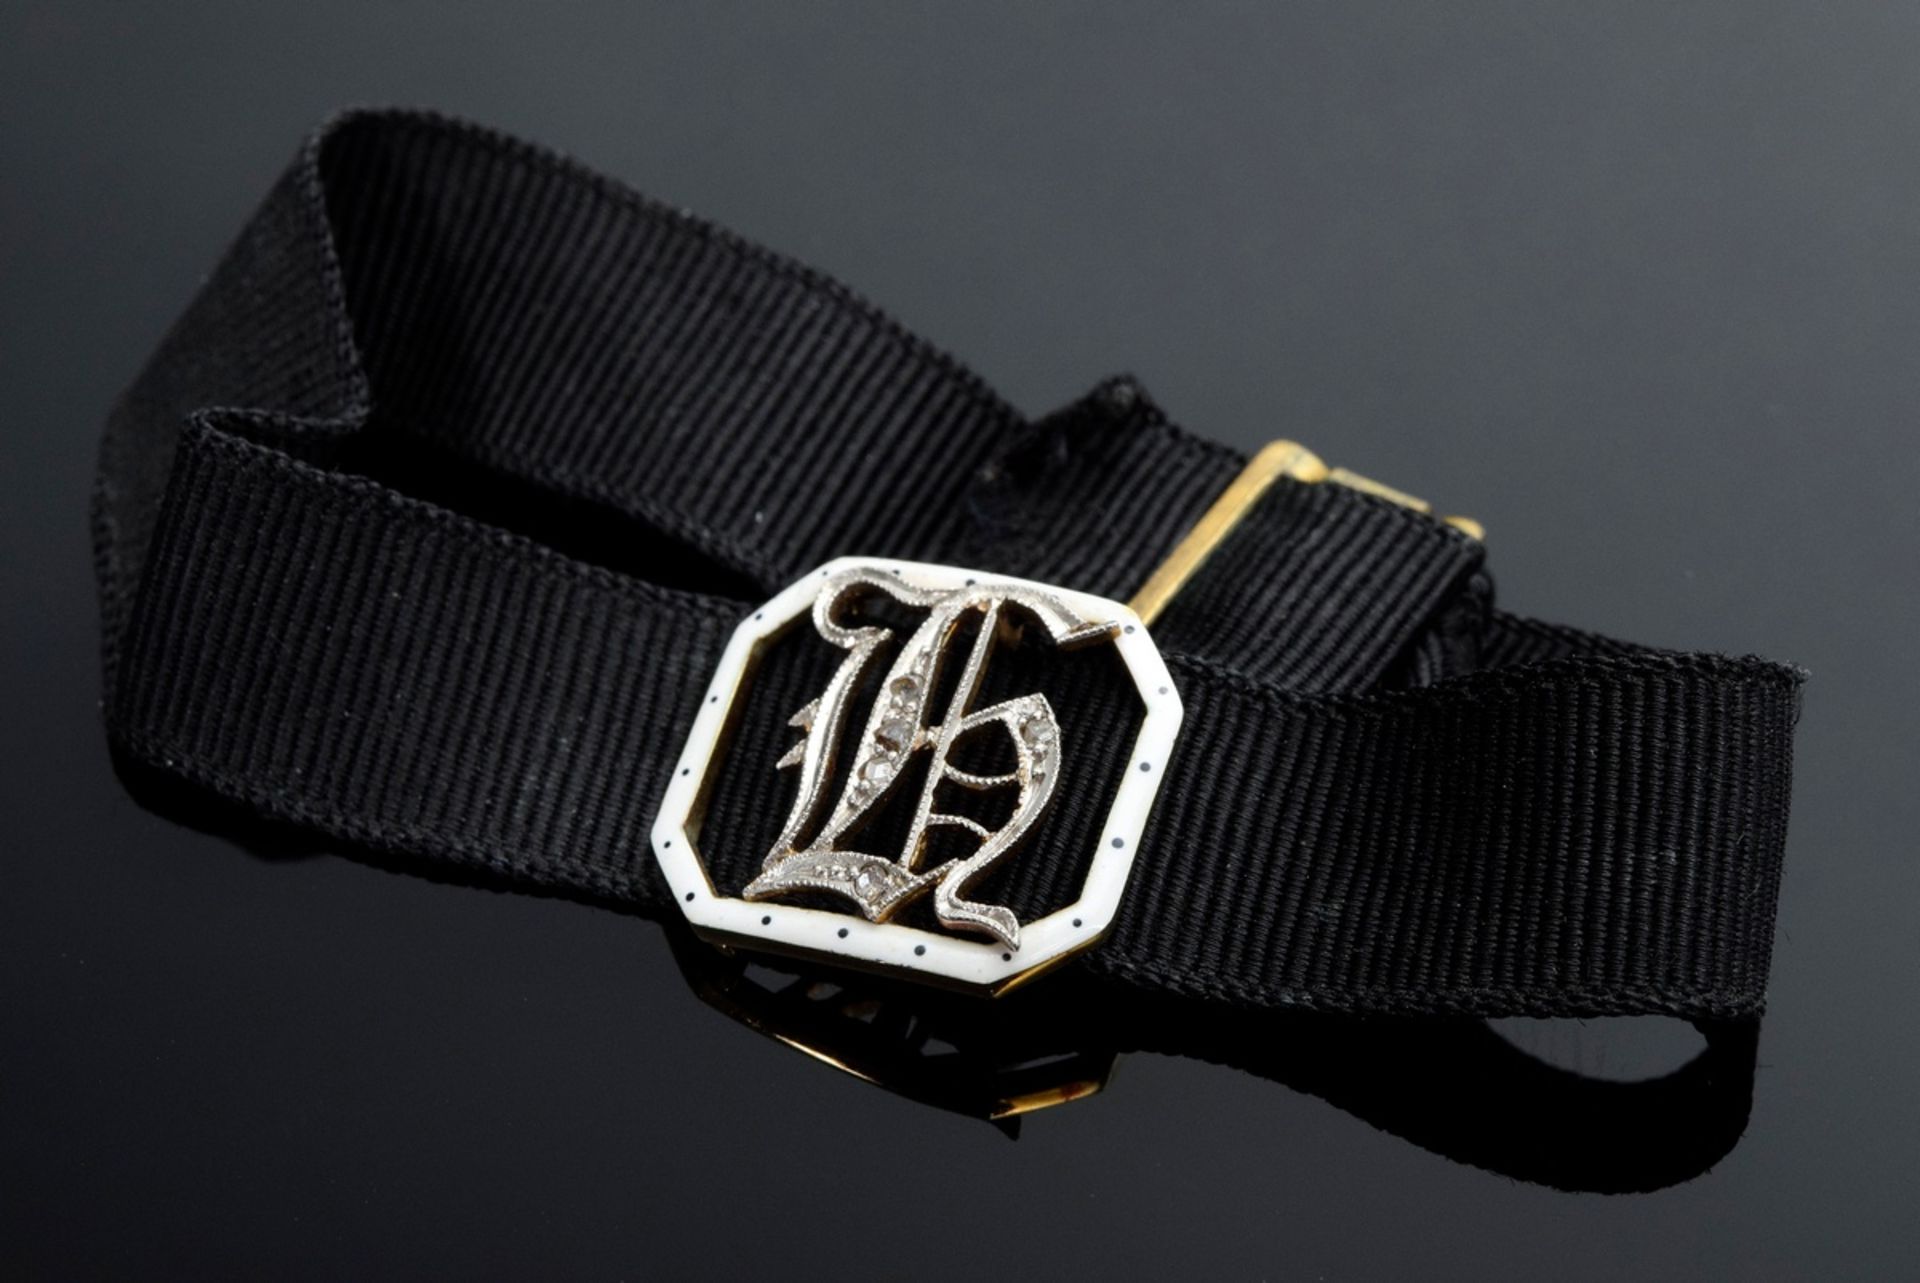 Black rep bracelet with openwork yellow gold 585 monogram plaque "H" and small diamond roses in ena